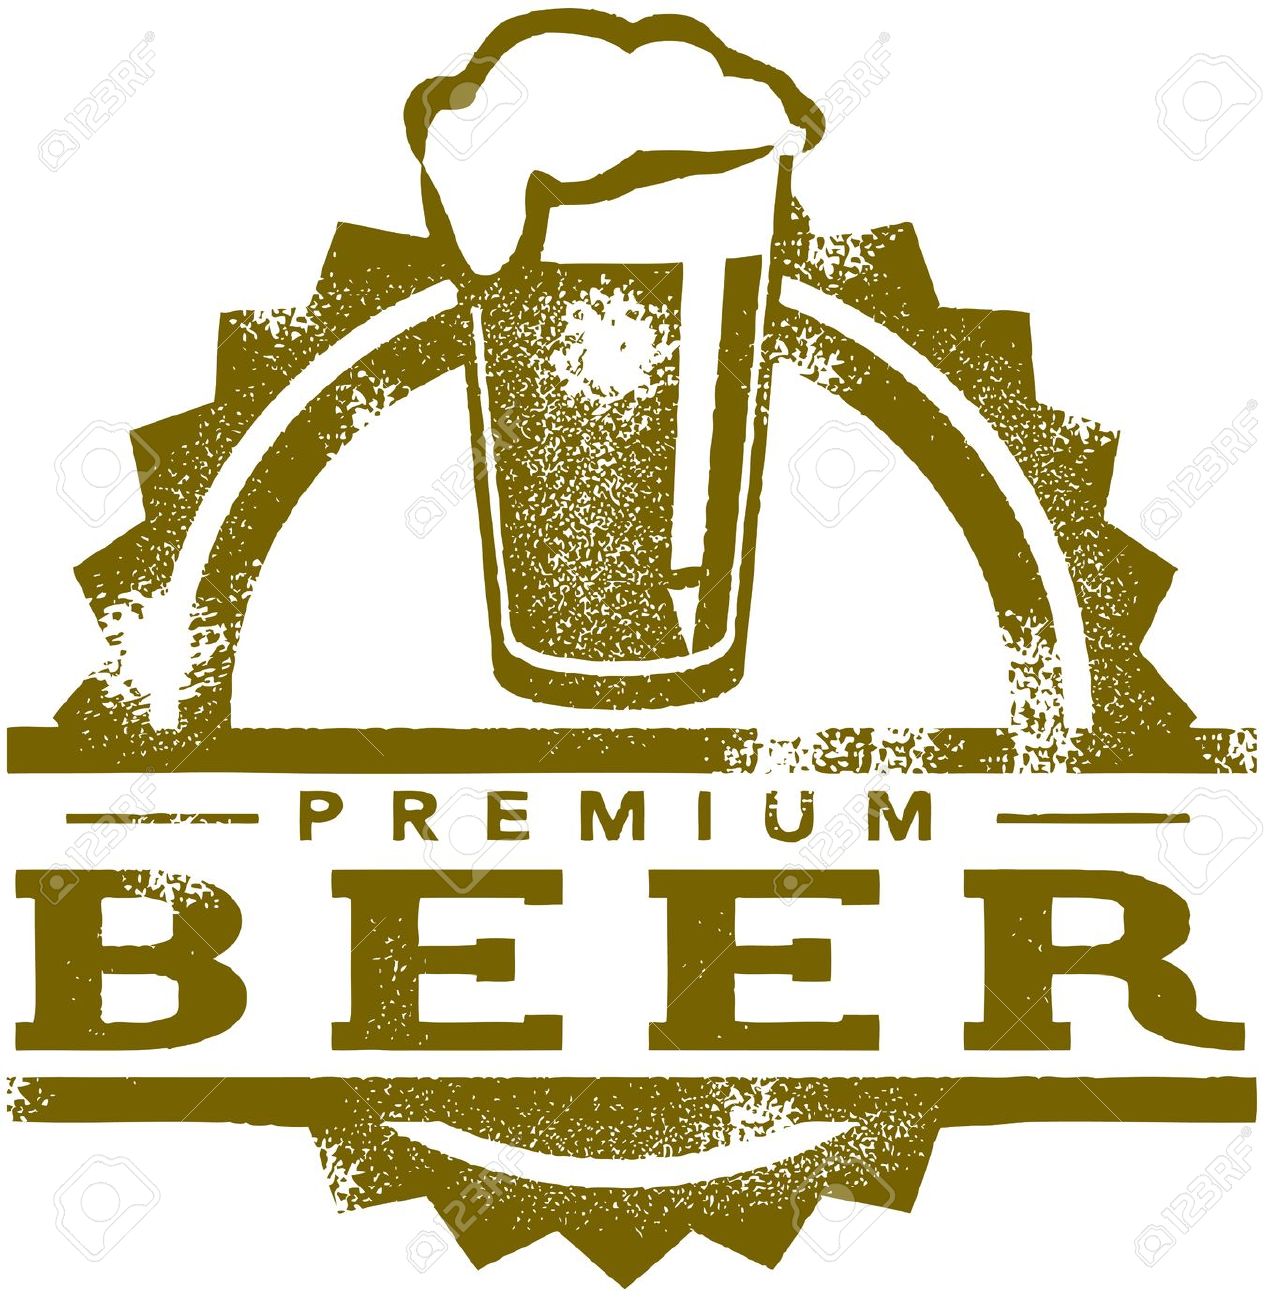 beer label clipart free - photo #6